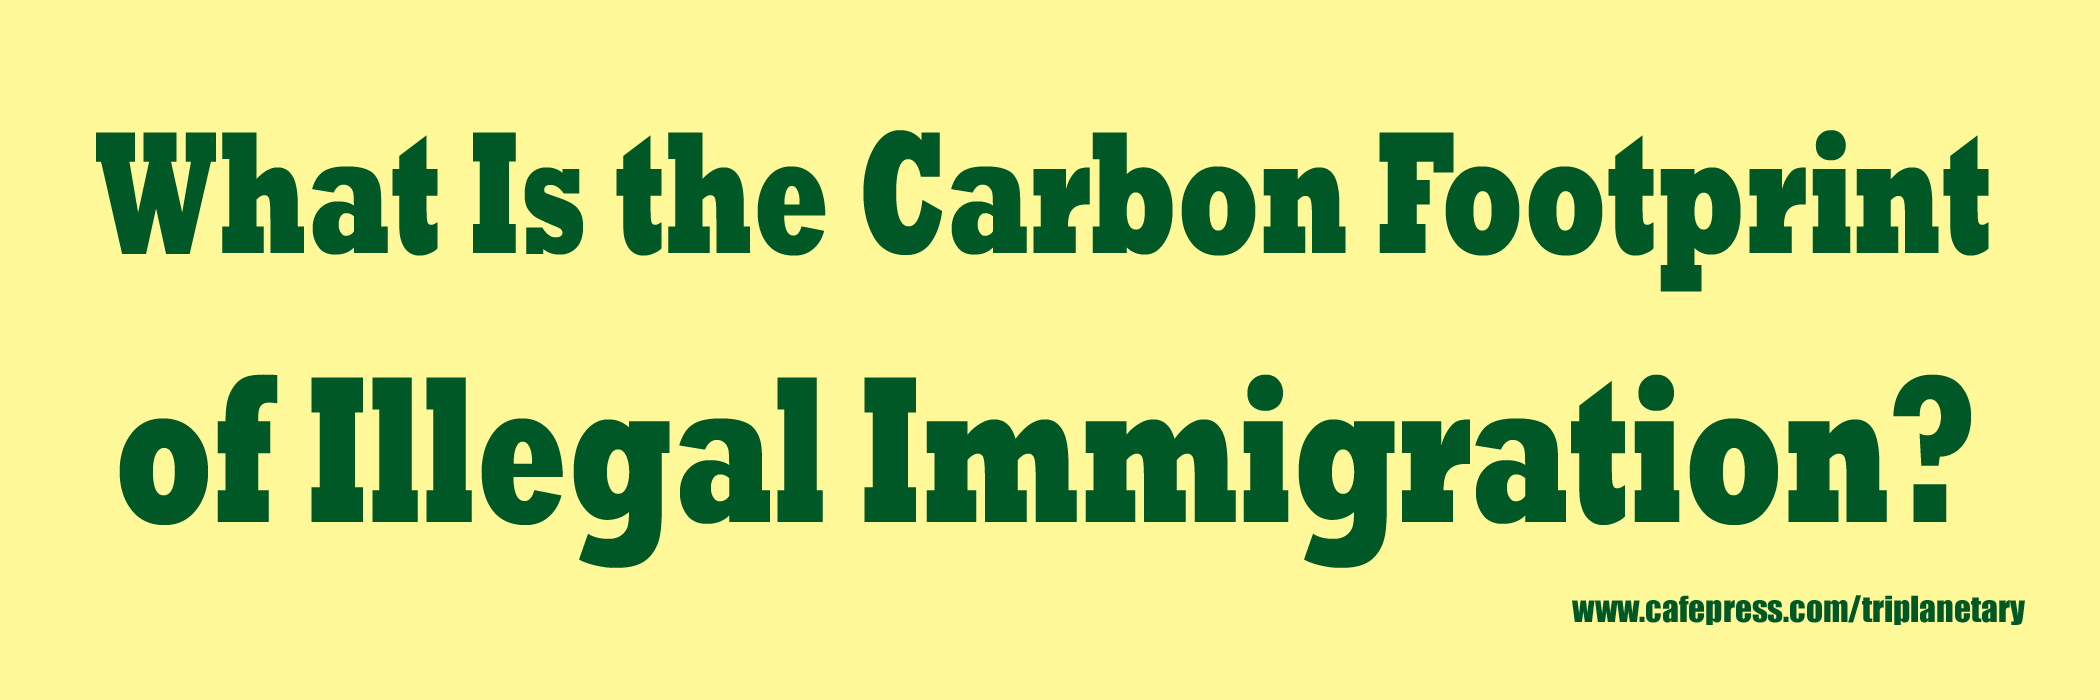 Green, and yellow image of bumper sticker: 'What is the Carbon Footprint of Illegal Immigration?'